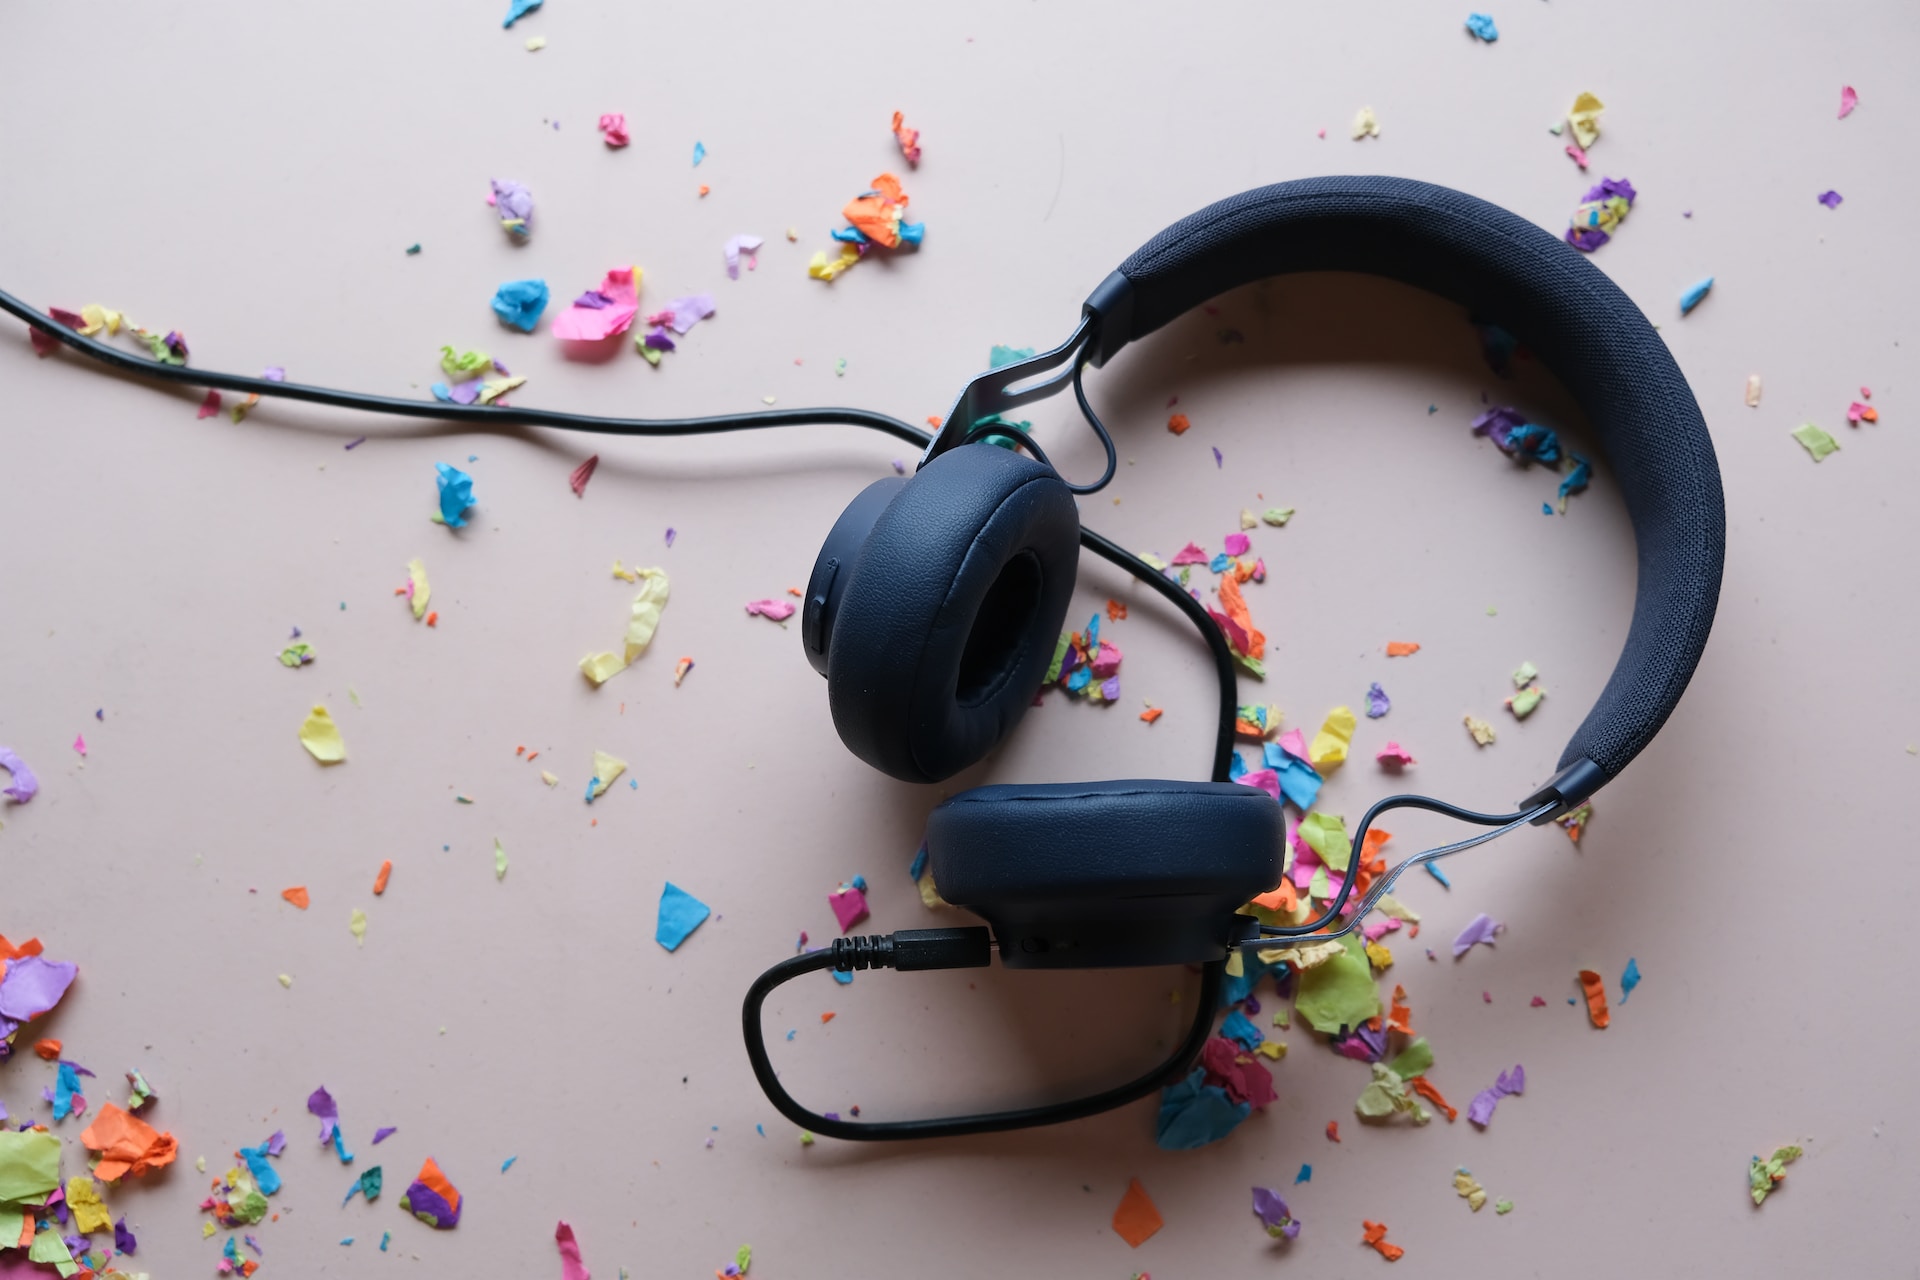 description: Description: A set of black, wired, over-the-ear headphones on a table.  There is colorful confetti scattered about.  Photo by Ryan Quintal on Unsplash.